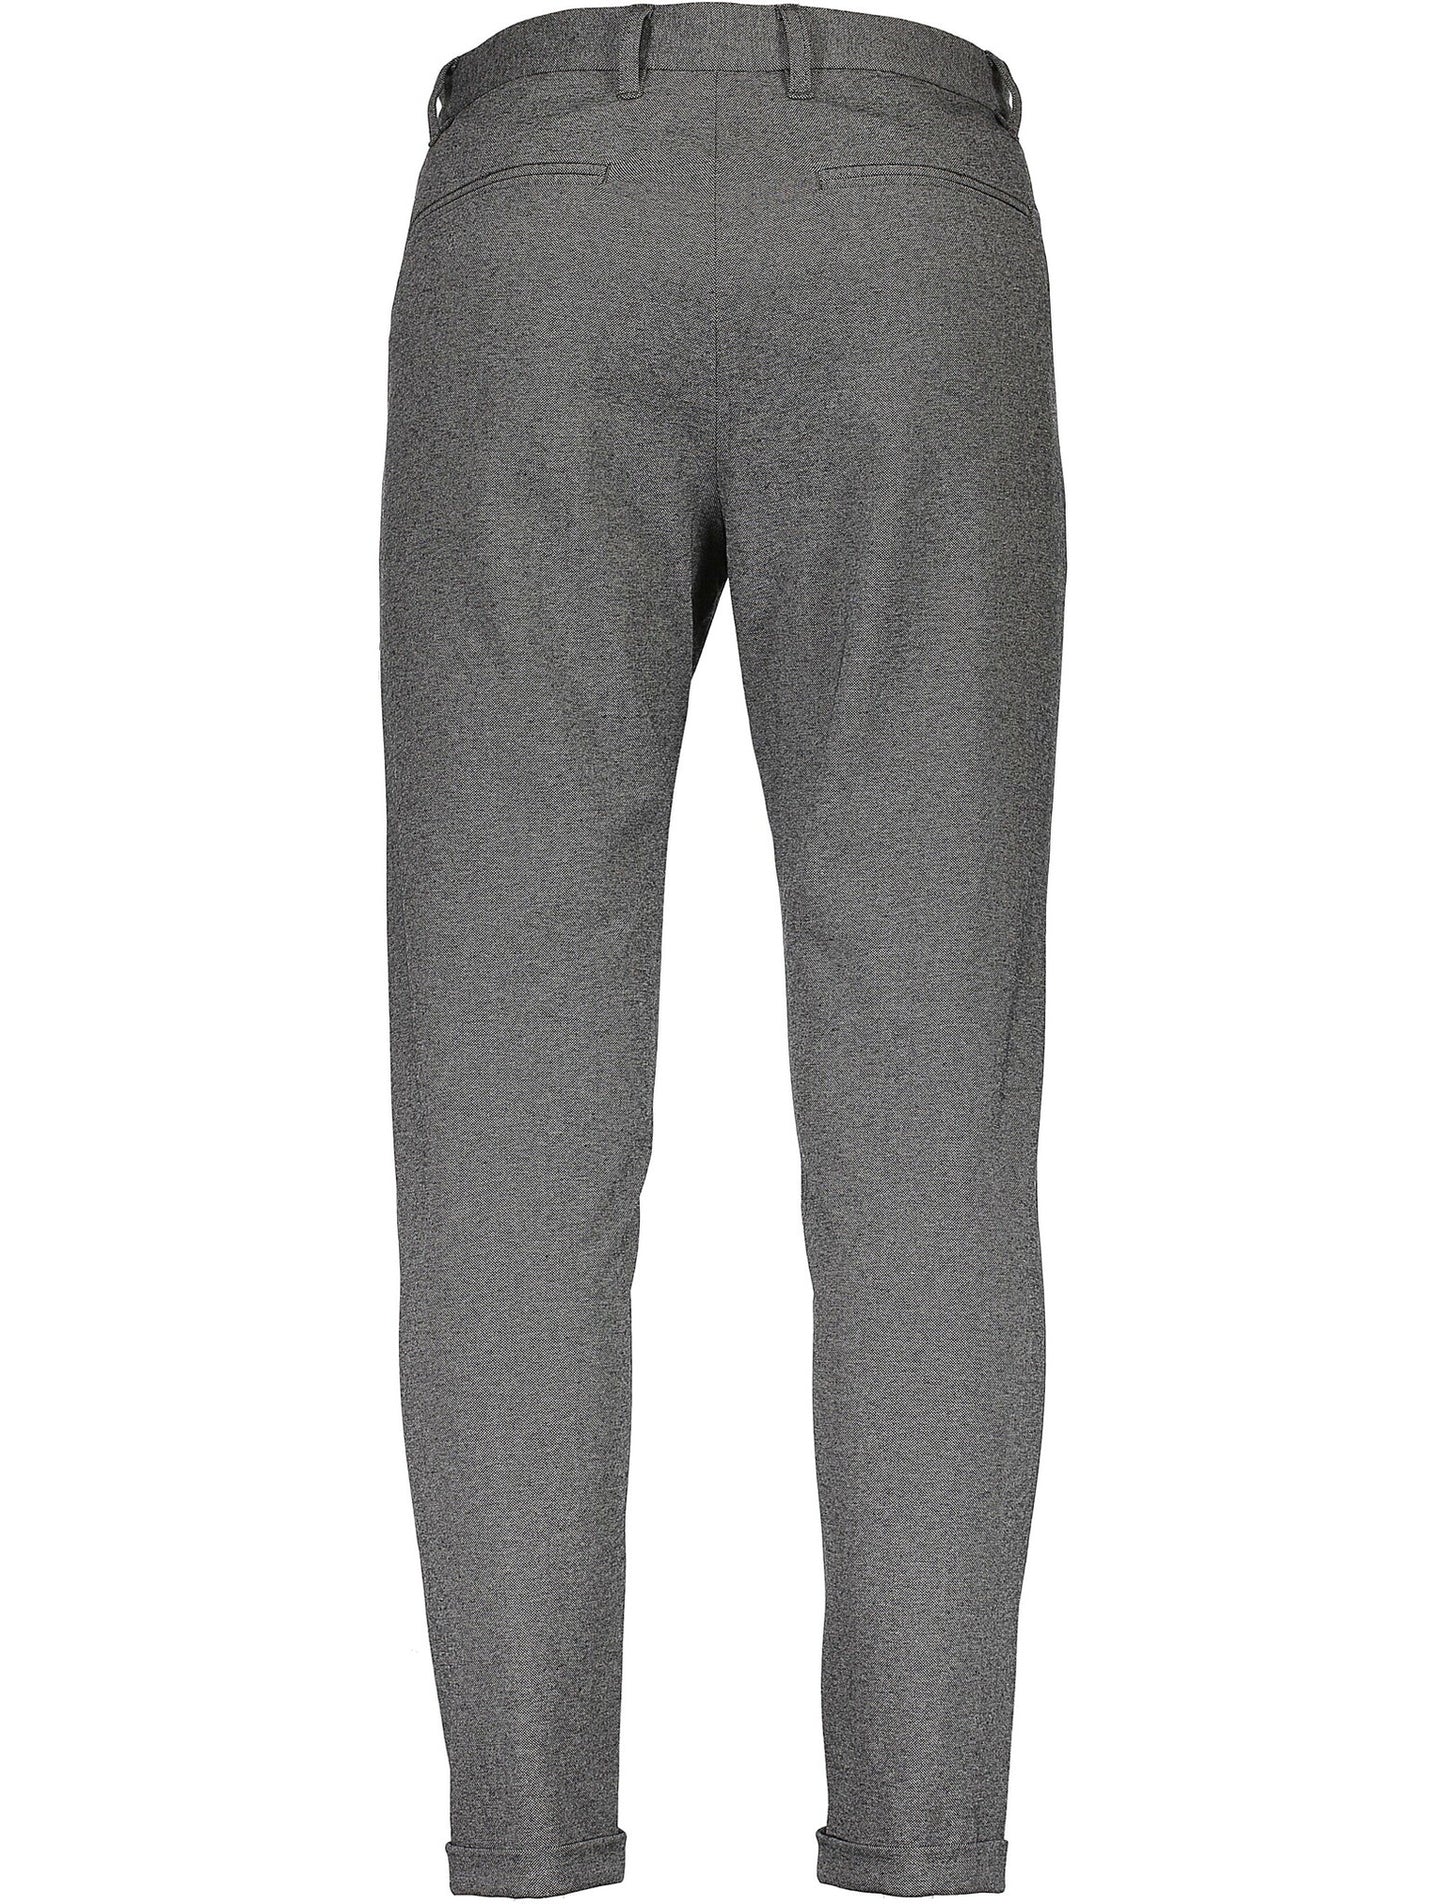 SUPERFLEX KNITTED CROPPED PANT GREY MIX